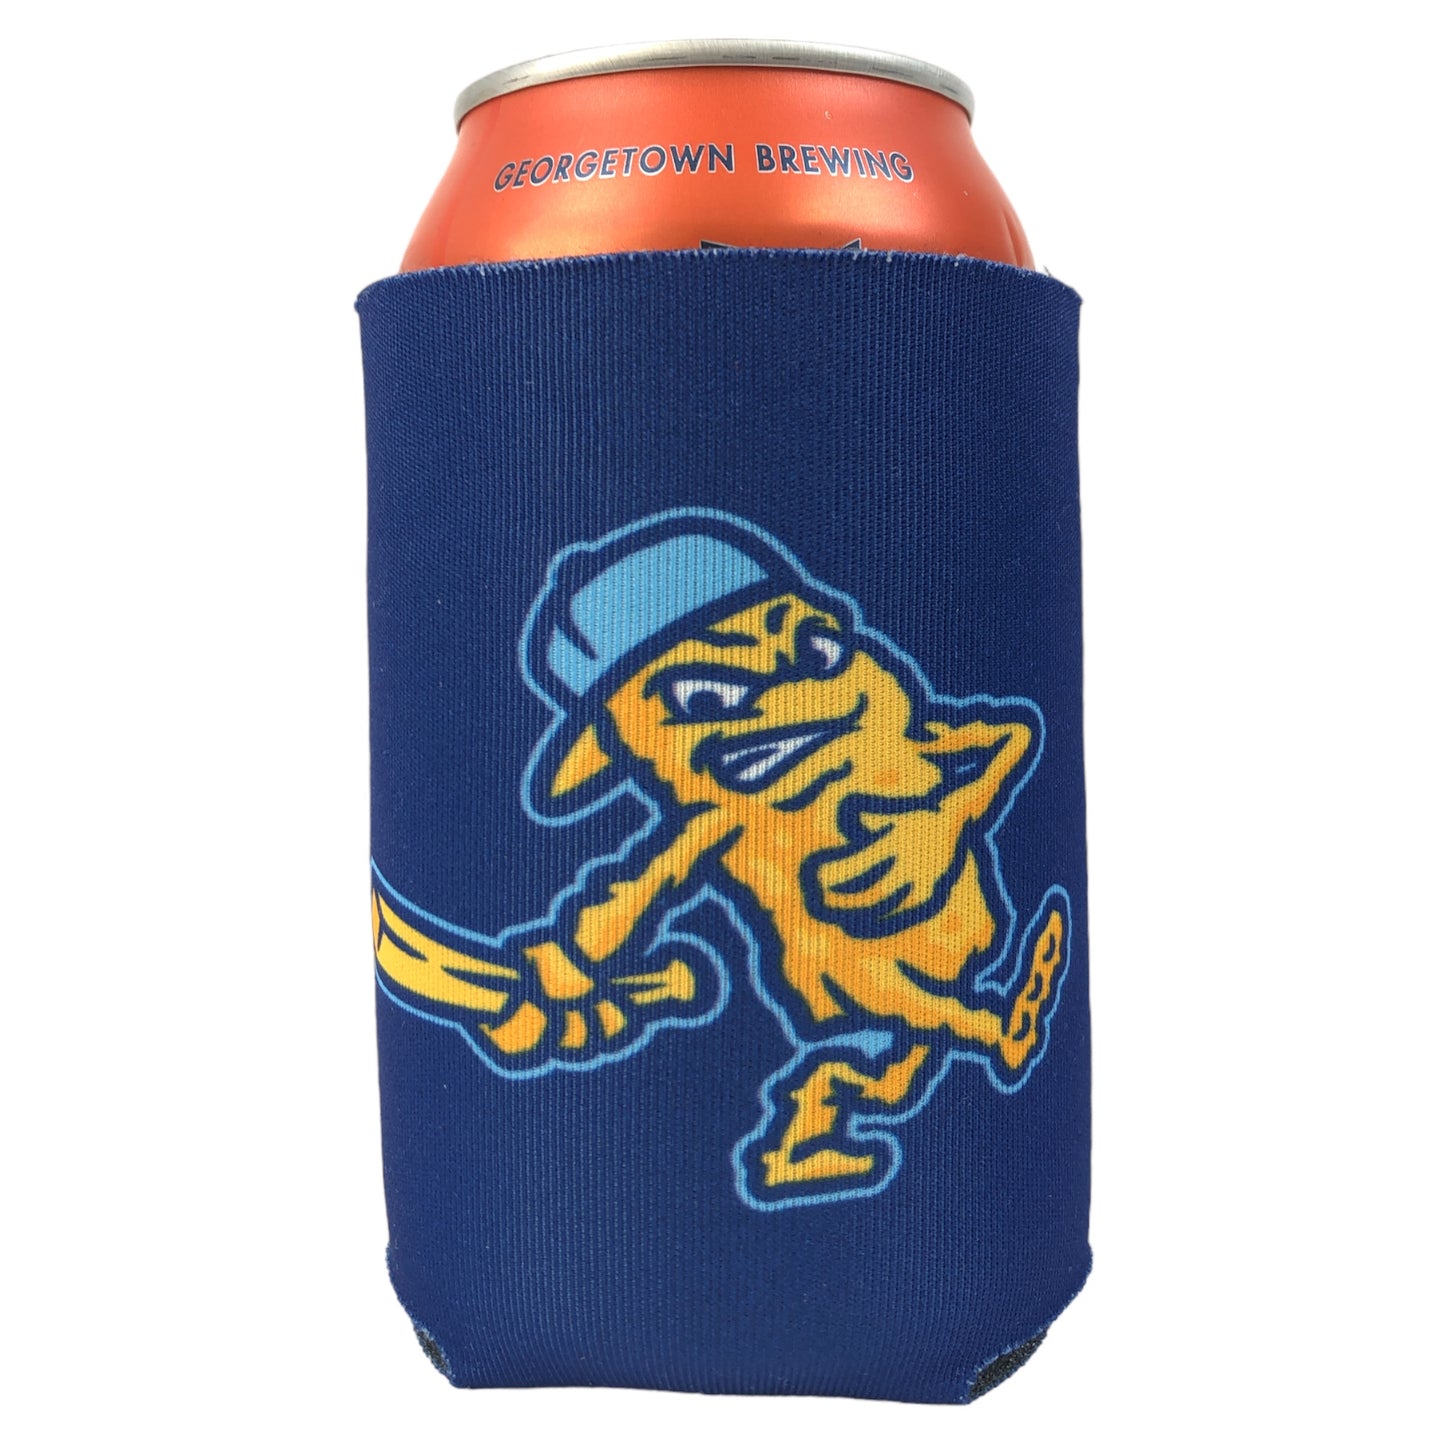 DubSea Fish Sticks can cooler with Georgetown Brewing beer can.